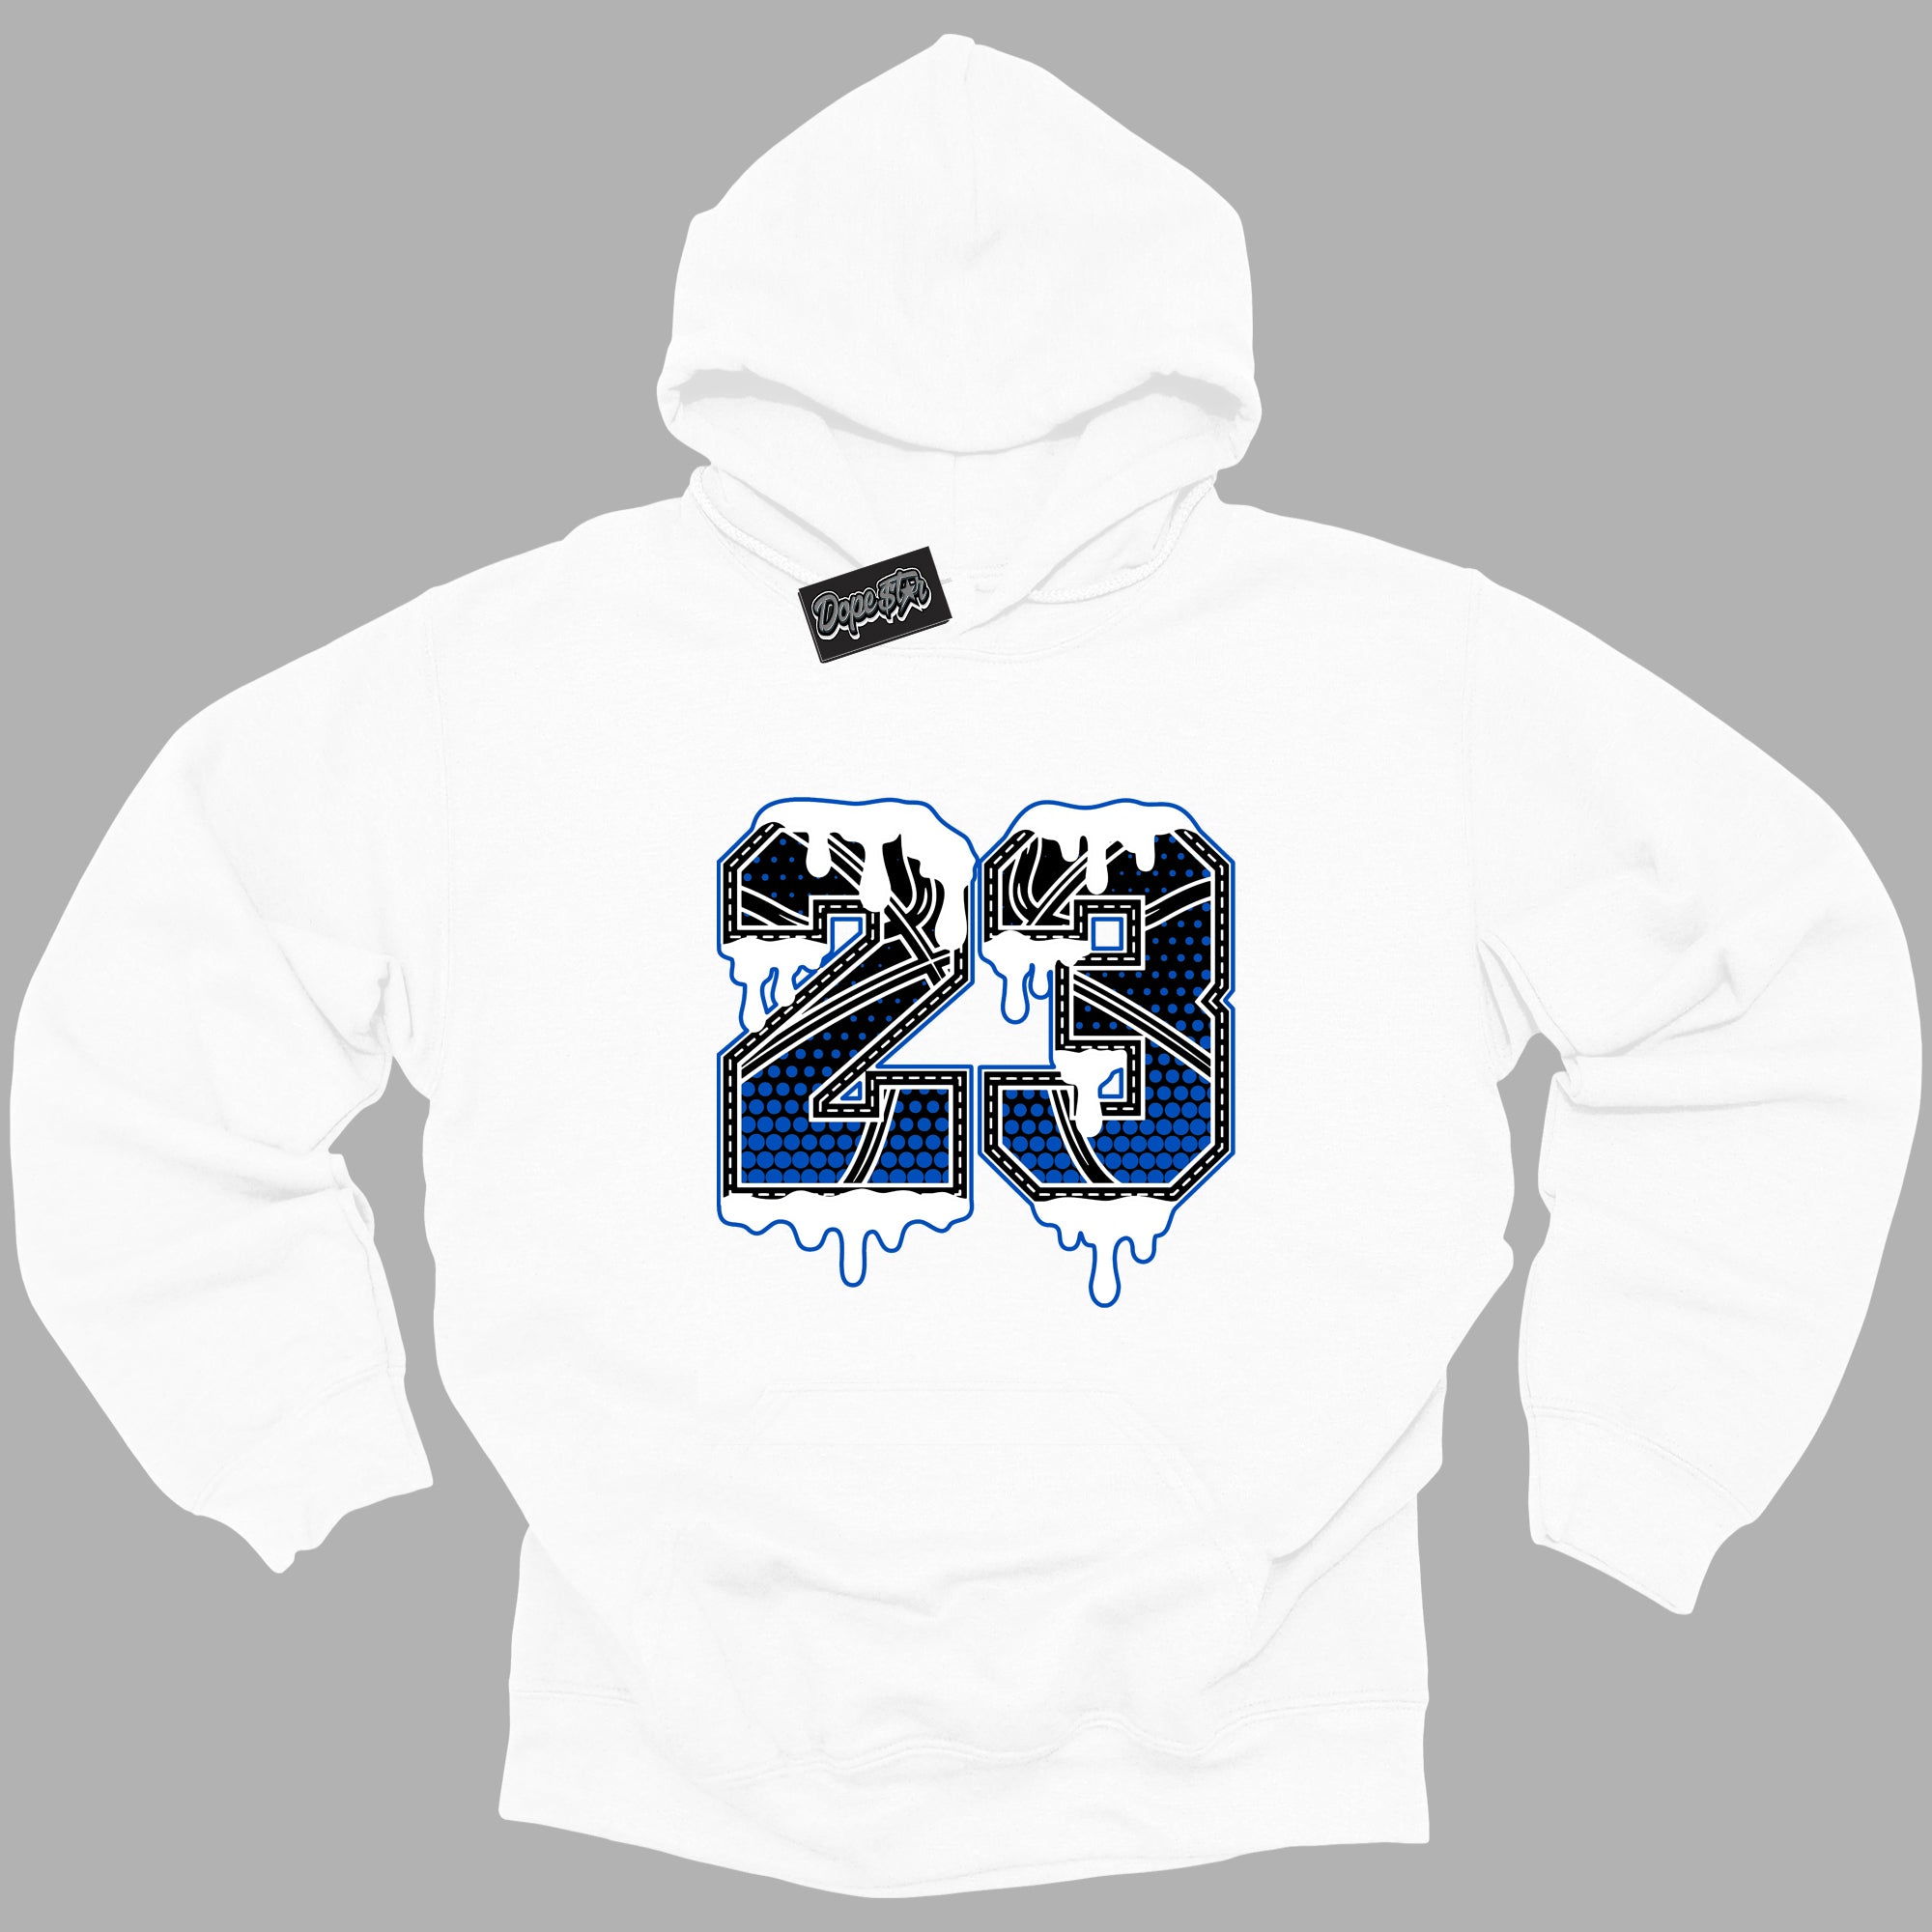 Cool White Hoodie with “ 23 Ball ”  design that Perfectly Matches Royal Reimagined 1s Sneakers.